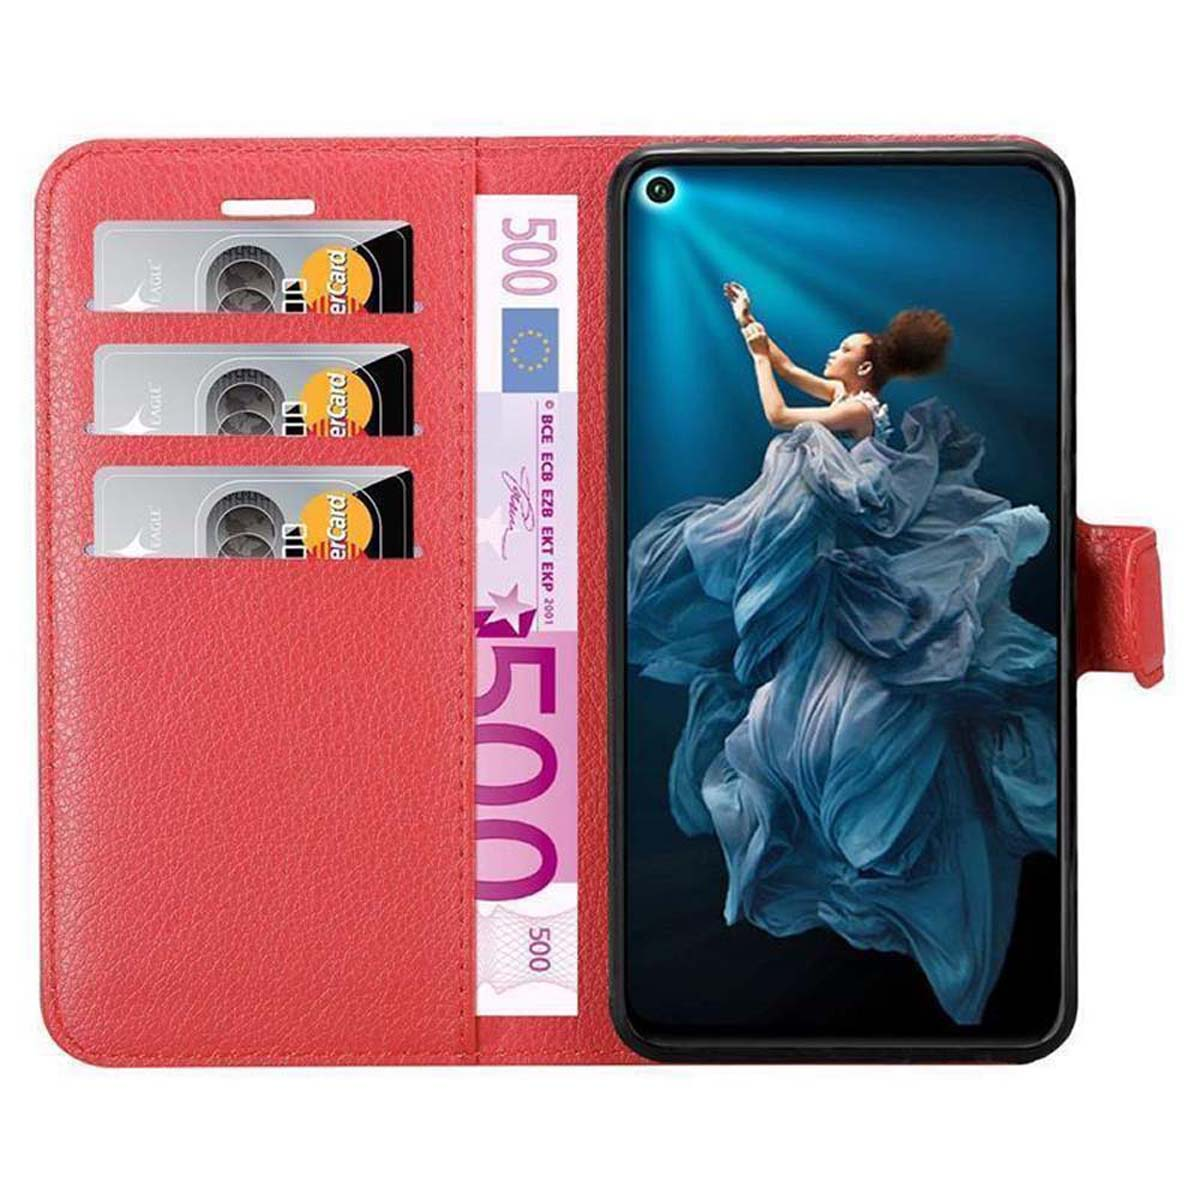 20S 20 / KARMIN 5T, Book Huawei / Honor, CADORABO Hülle Bookcover, ROT NOVA Standfunktion,